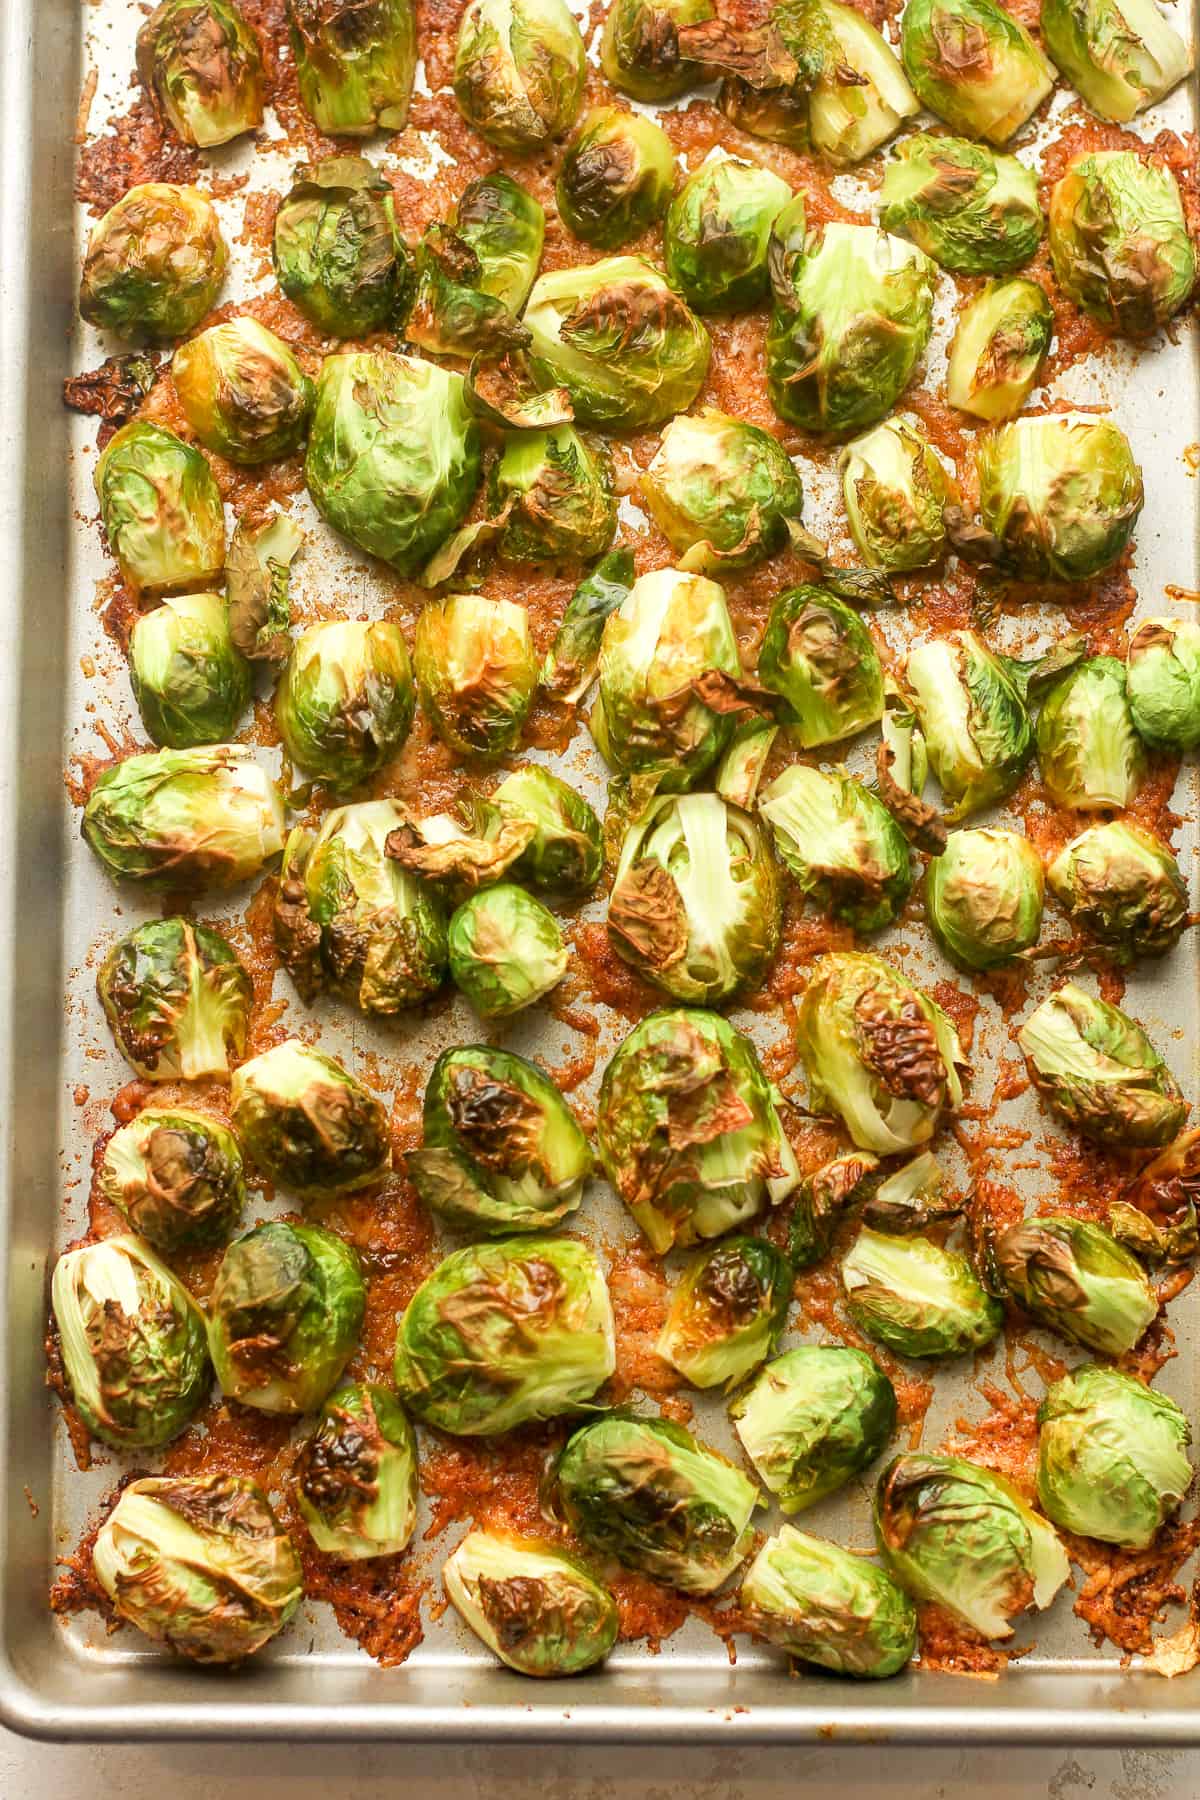 A pan of the roasted brussels sprouts.